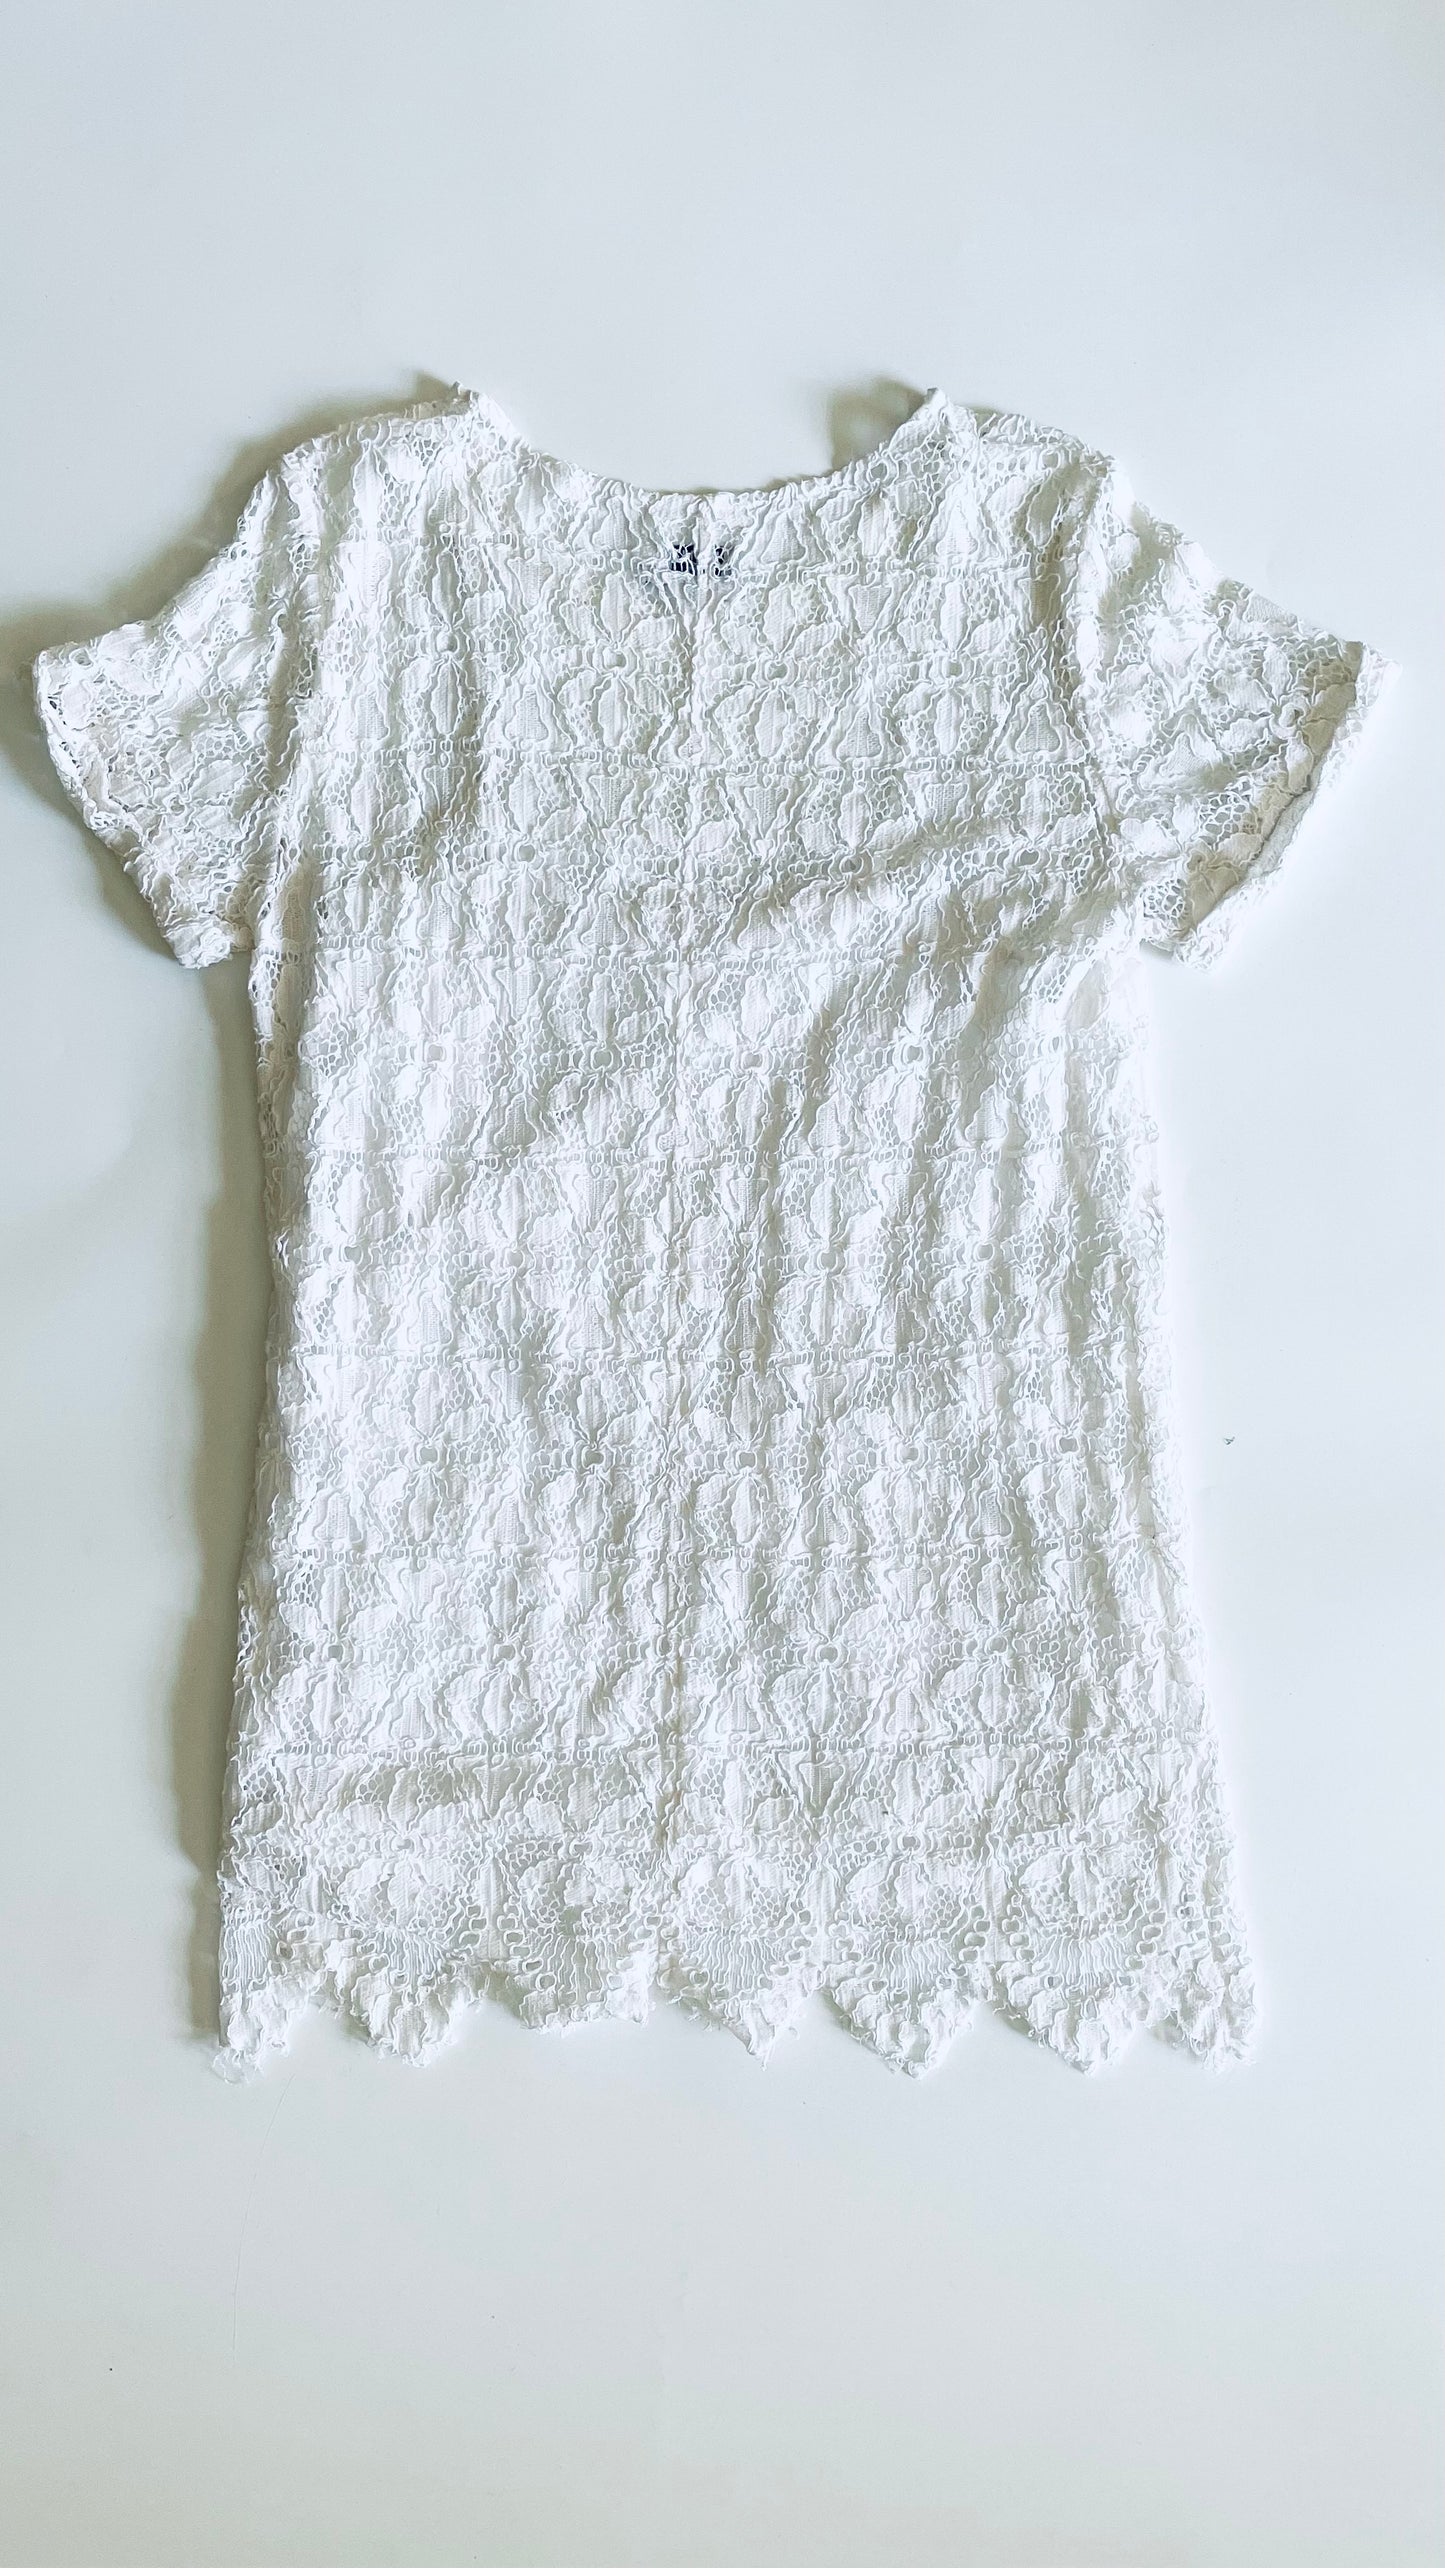 Pre-Loved FRAME white lace t-shirt dress - Size M